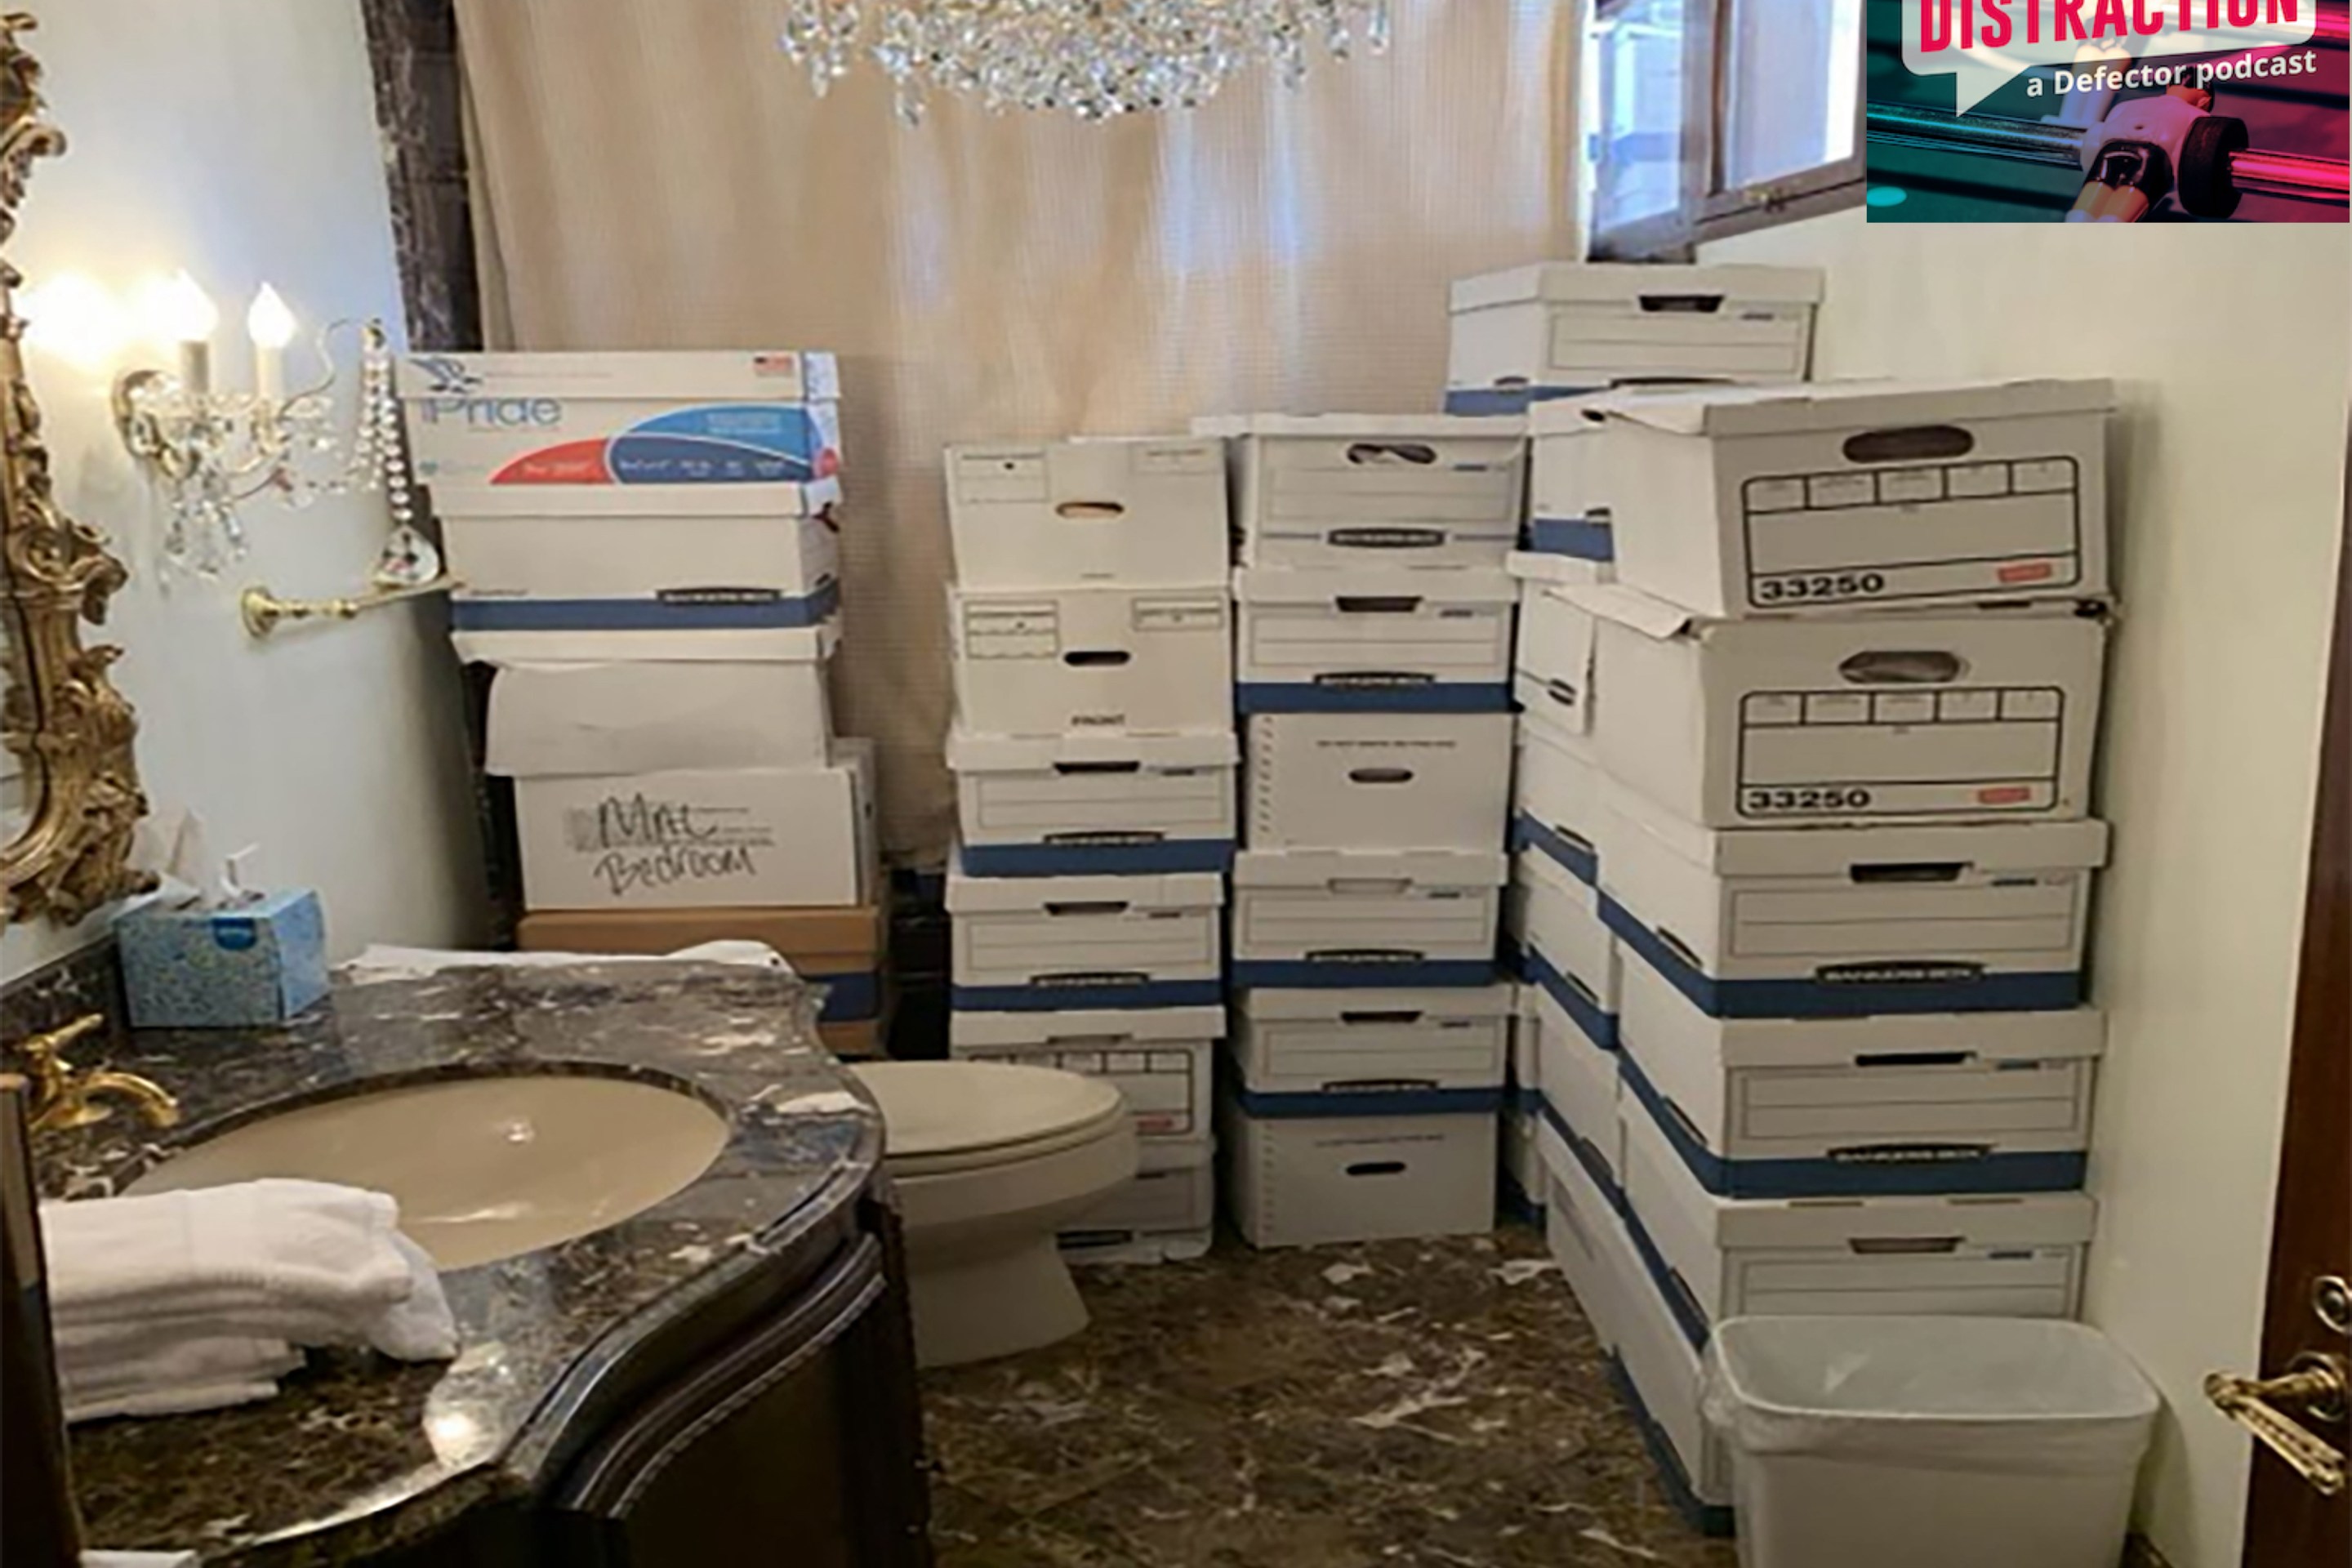 A bathroom at Mar-a-Lago positively jammed with boxes full of junk.